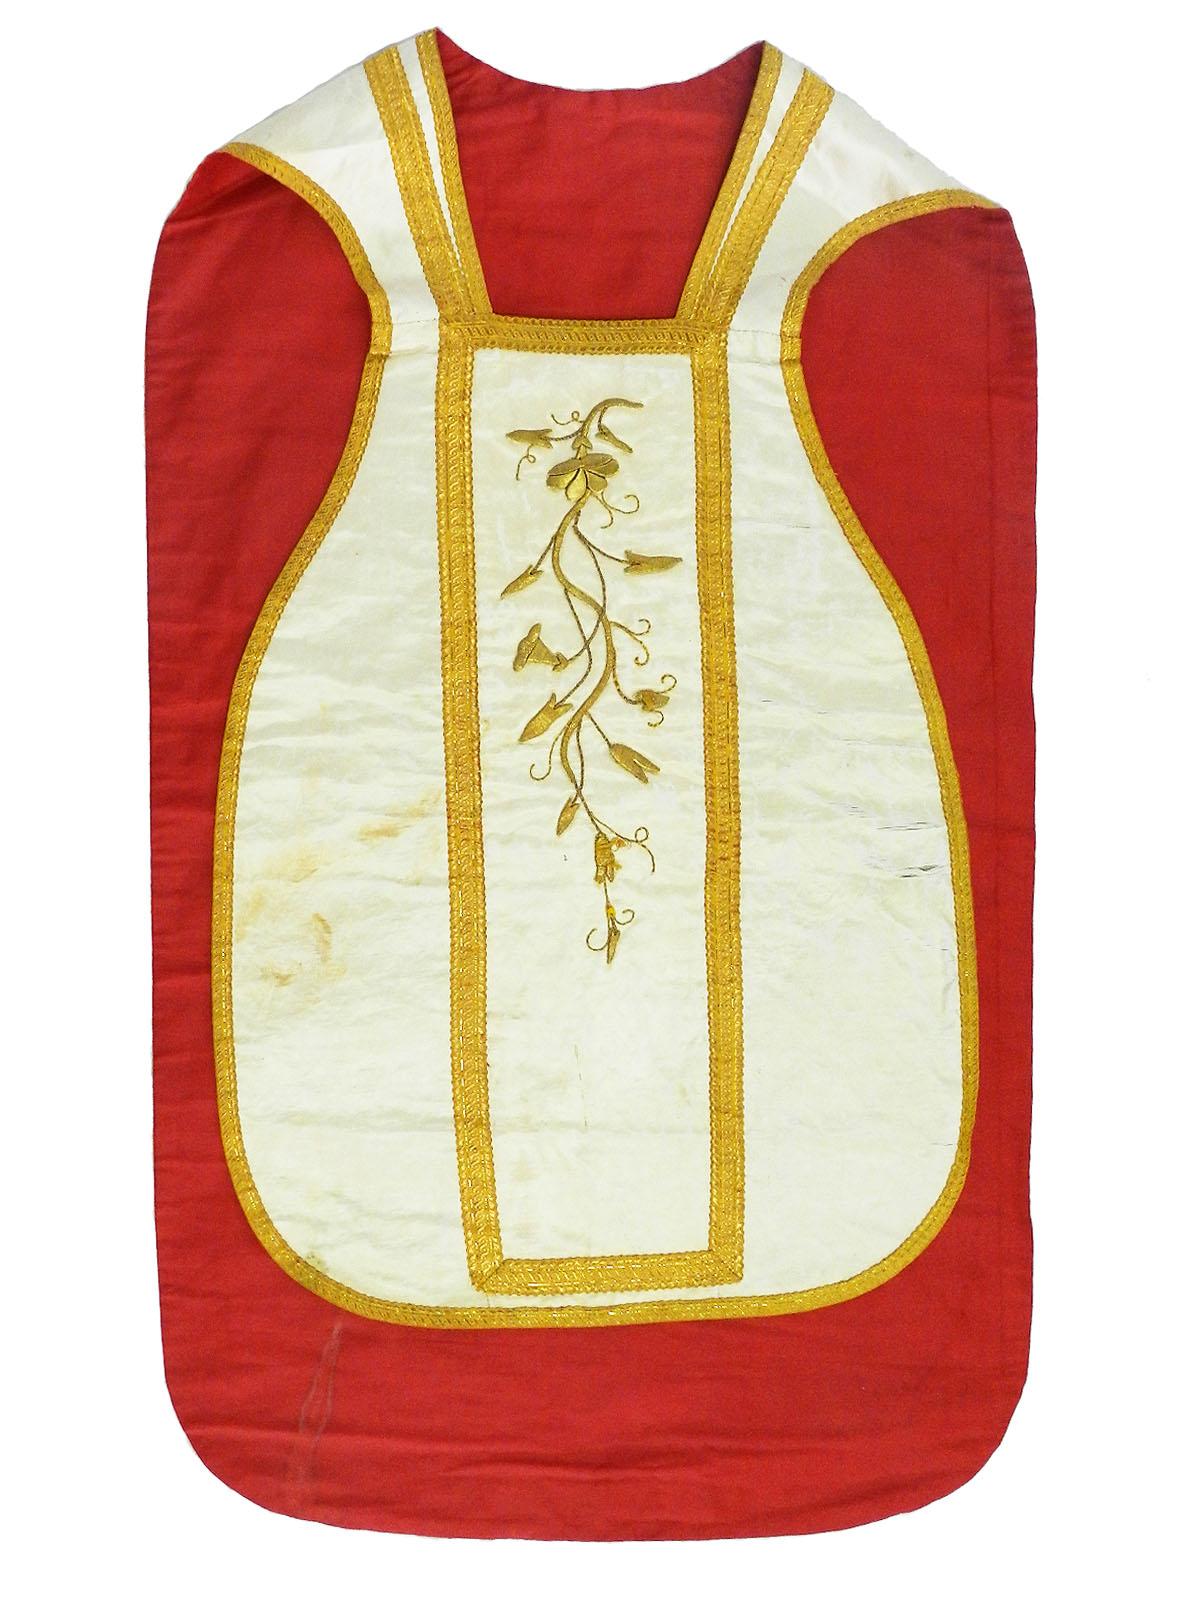 Neoclassical Antique Chasuble Religious Vestment Embroidered Textile, circa 1890